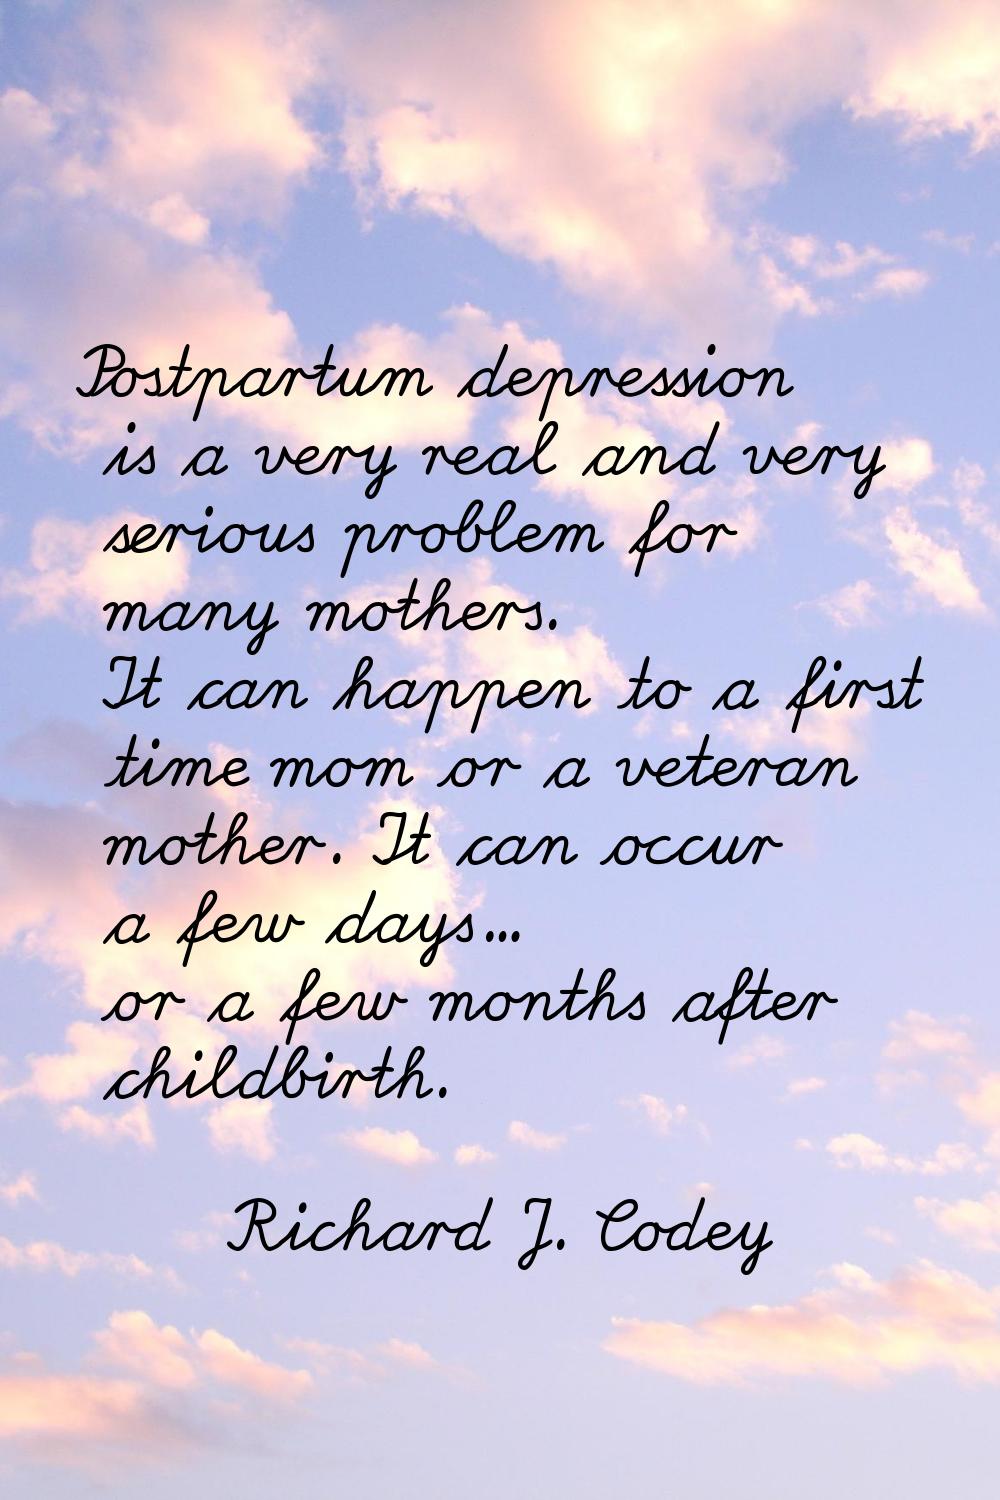 Postpartum depression is a very real and very serious problem for many mothers. It can happen to a 